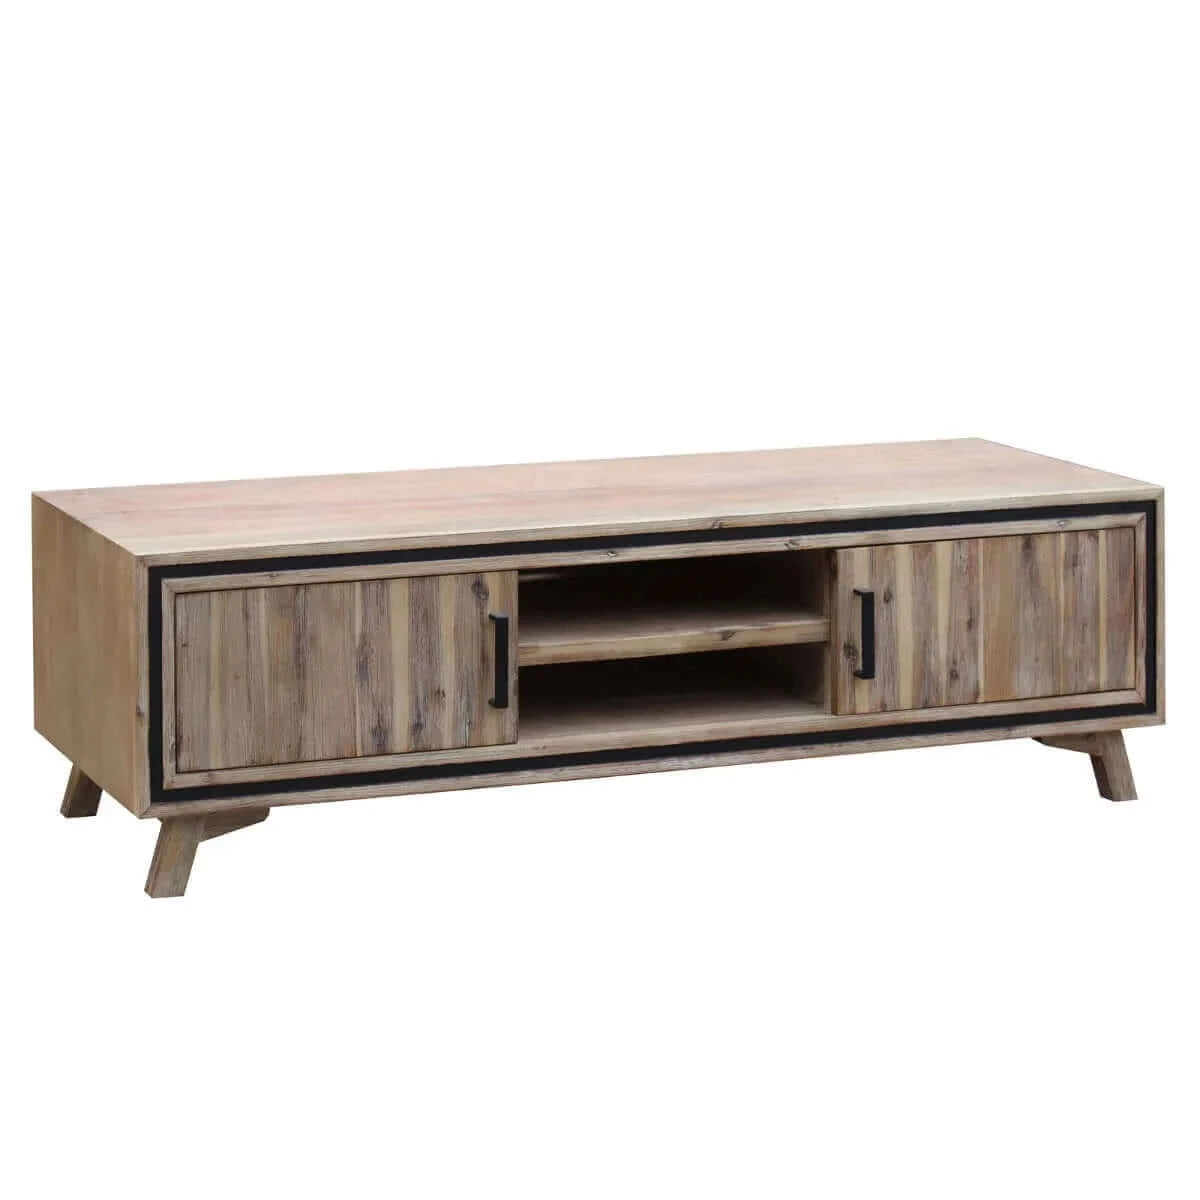 Buy TV Cabinet with 2 Storage Drawers Cabinet Solid Acacia Wooden Entertainment Unit in Sliver -Upinteriors